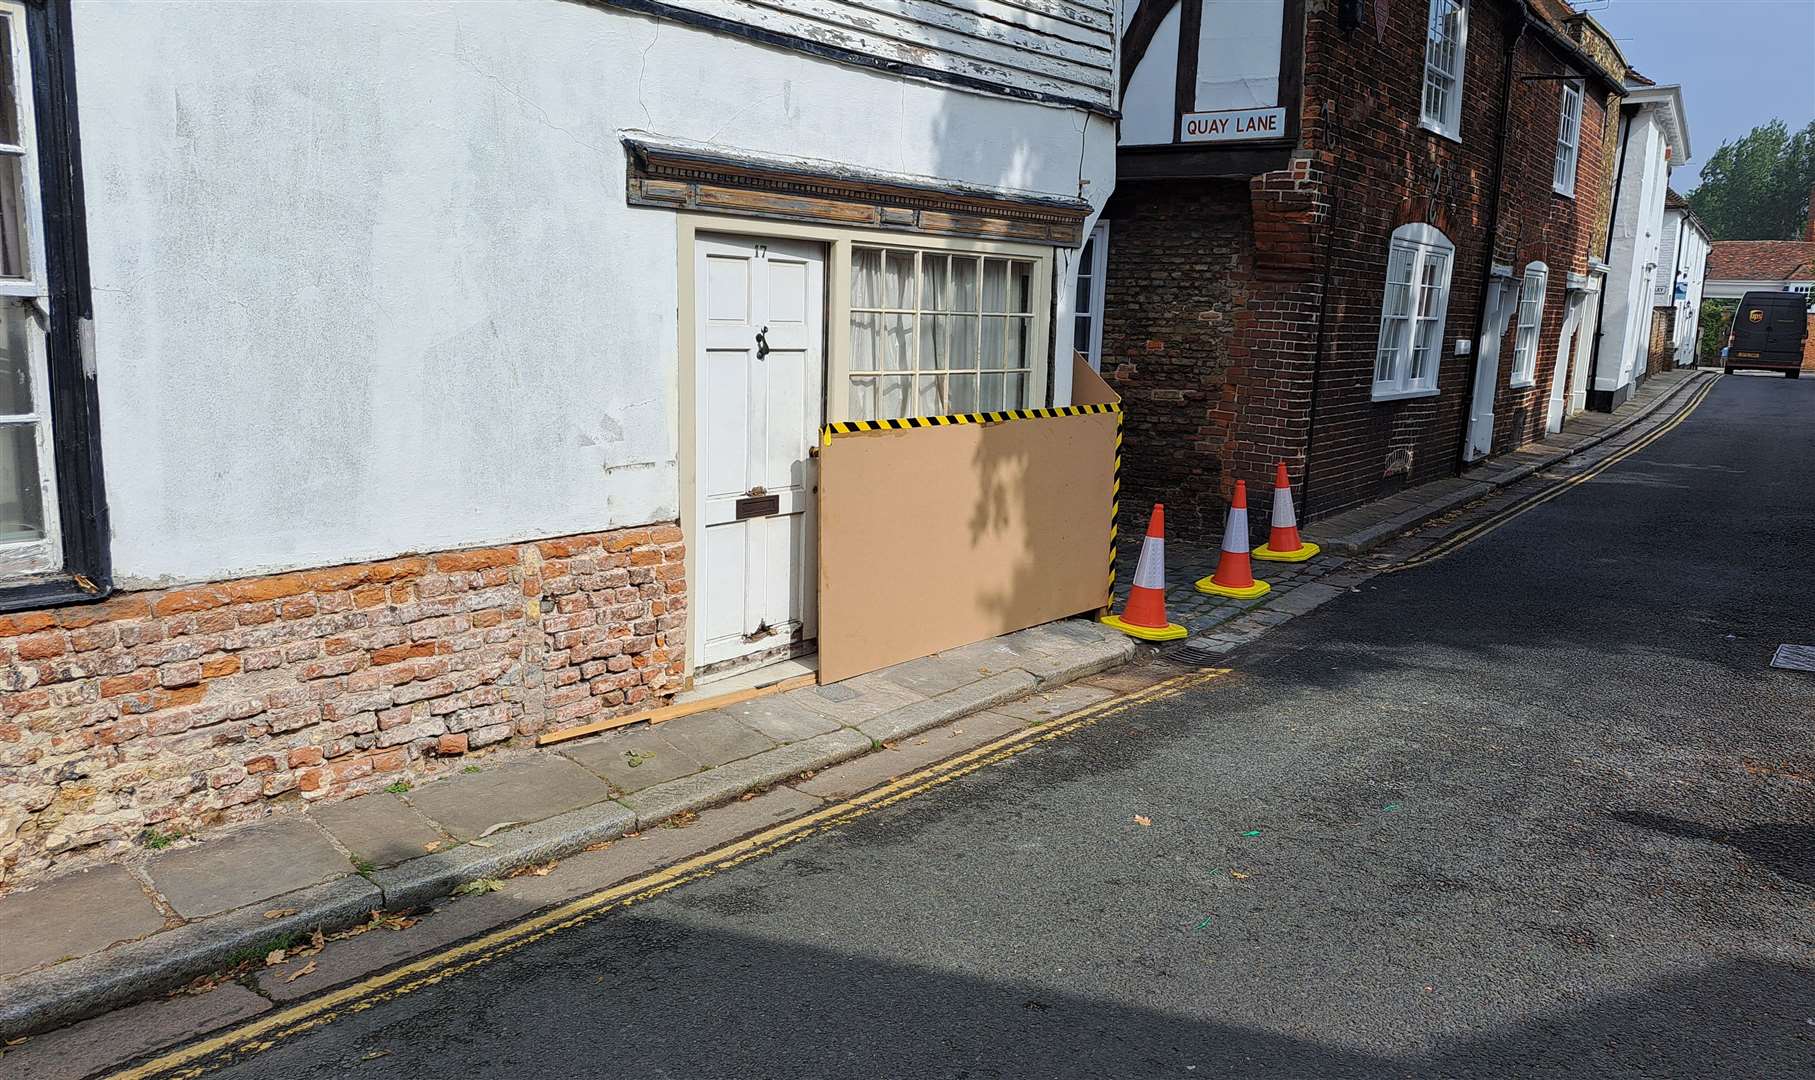 The house in Sandwich is boarded up after a crash yesterday